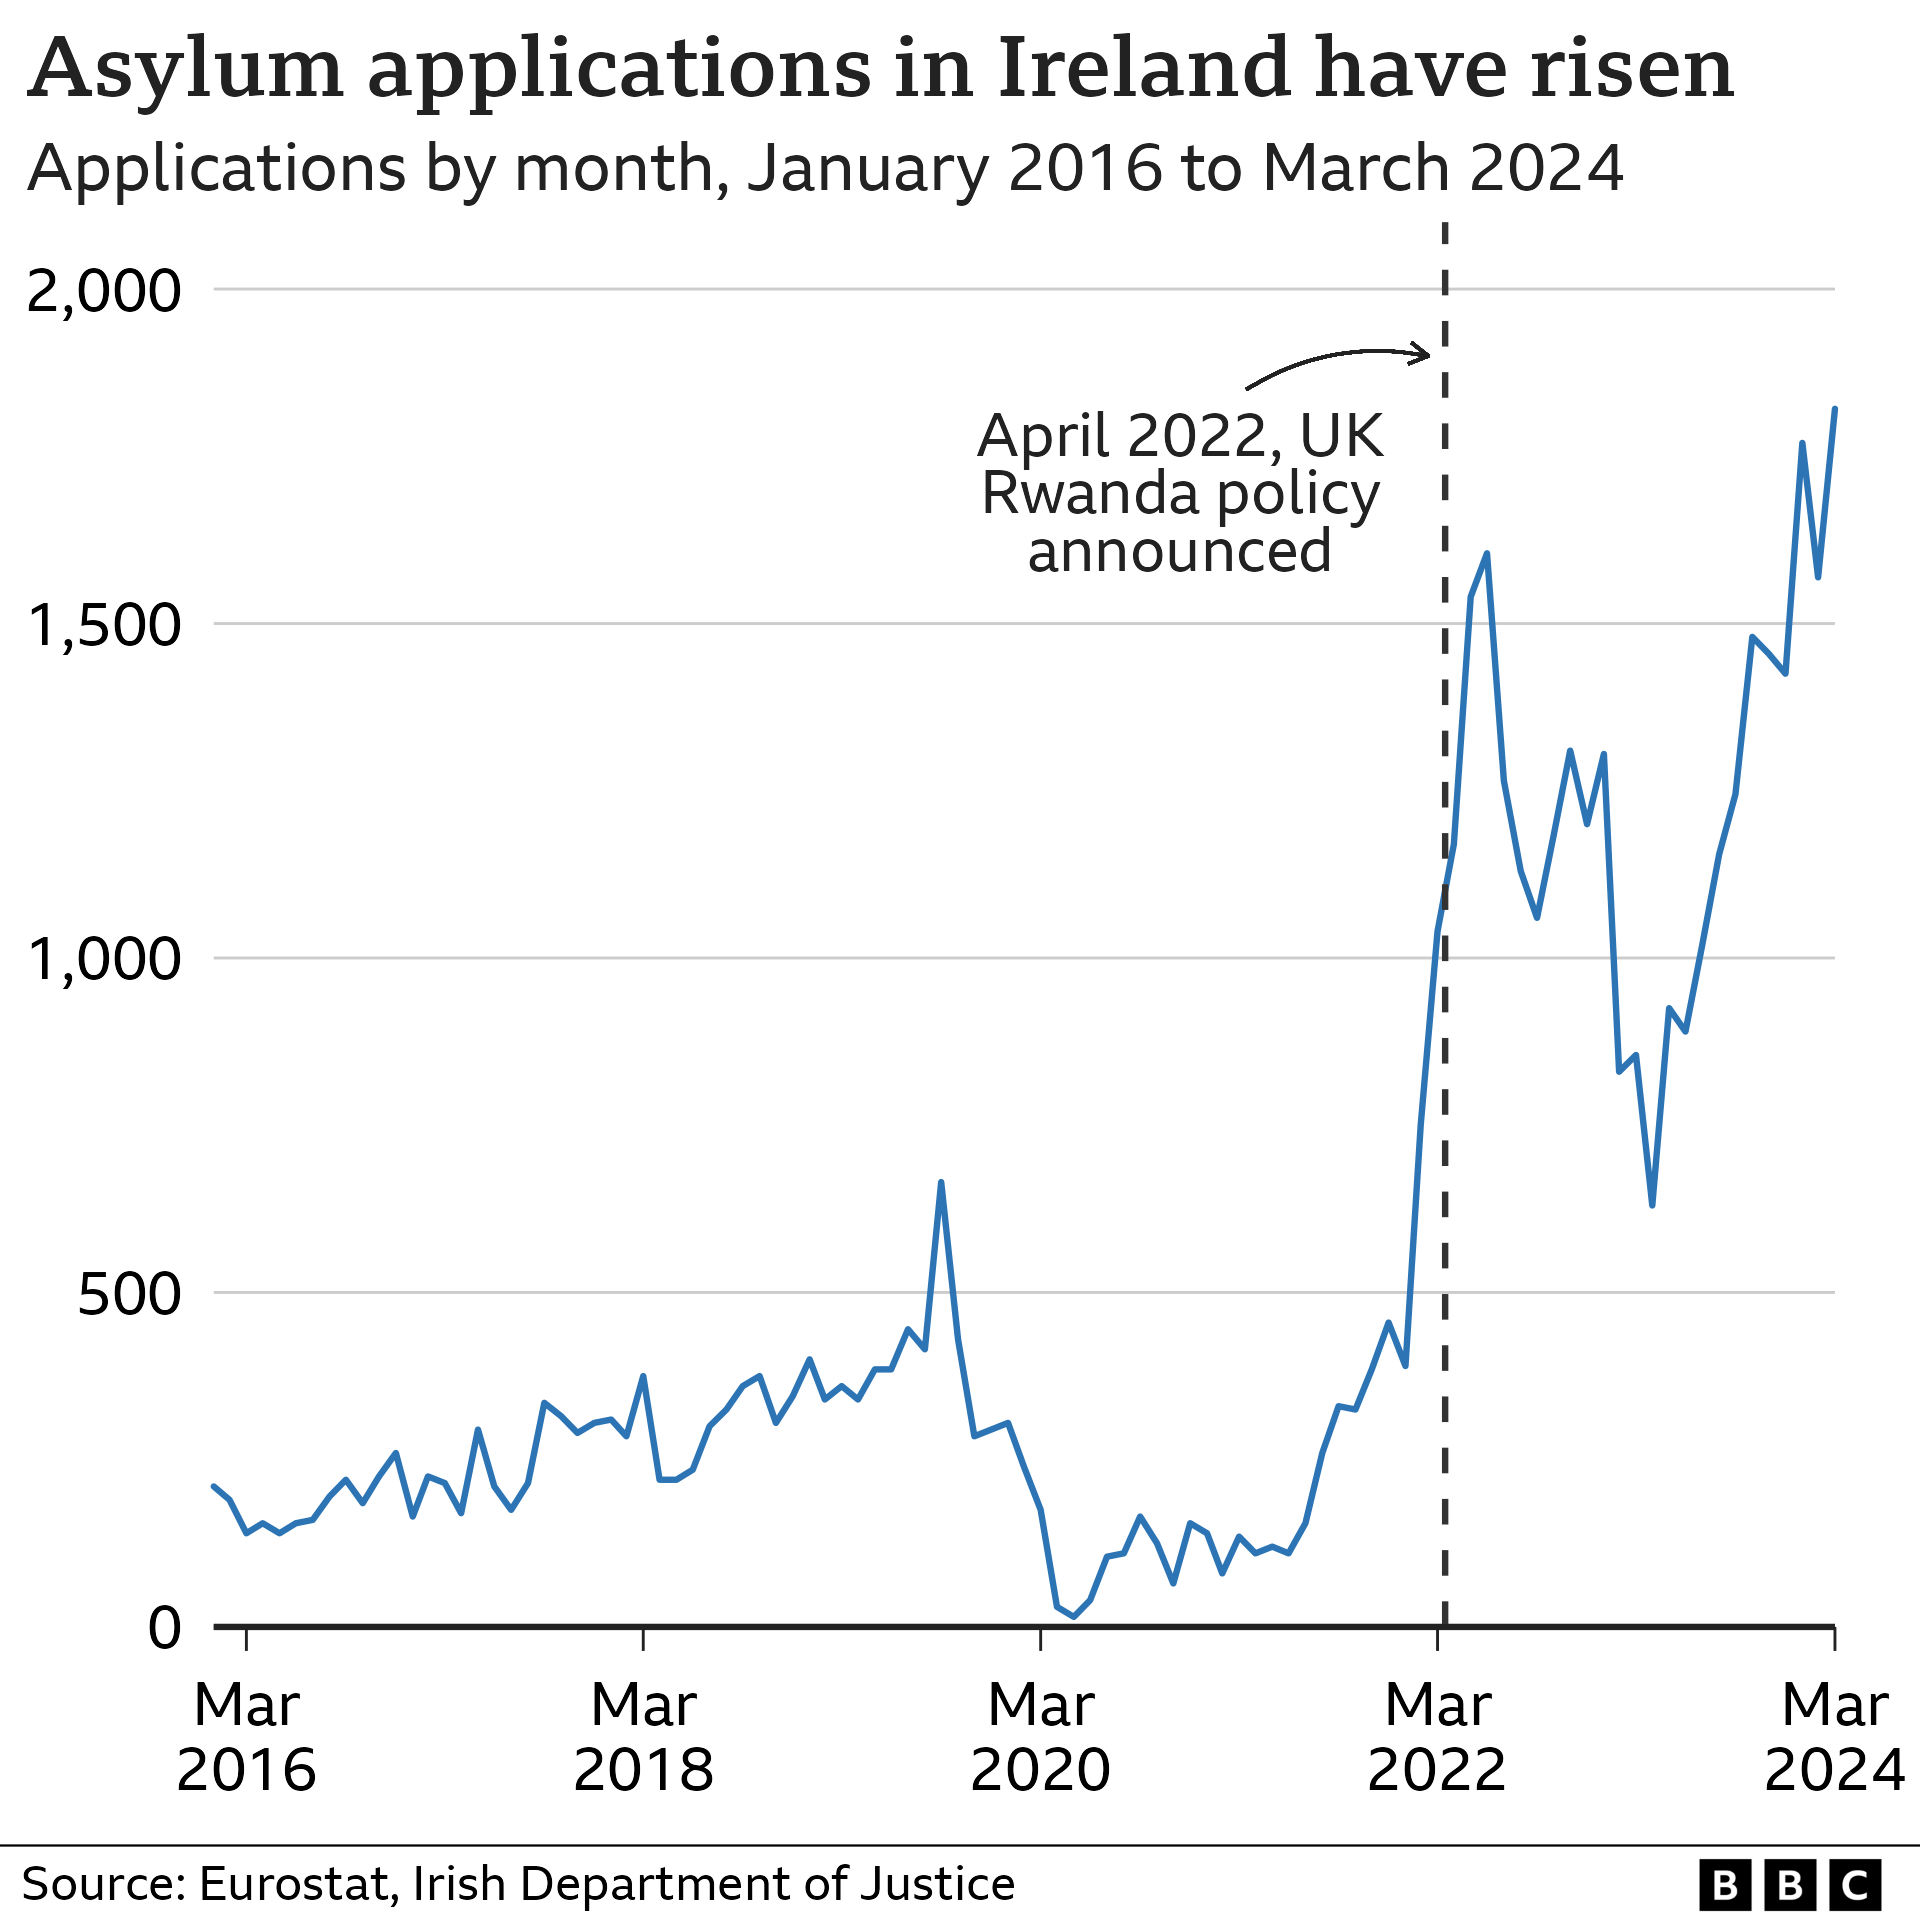 A chart showing monthly asylum application in Ireland, from January 2016 to March 2024, with a sharp rise in late 2021/early 2022